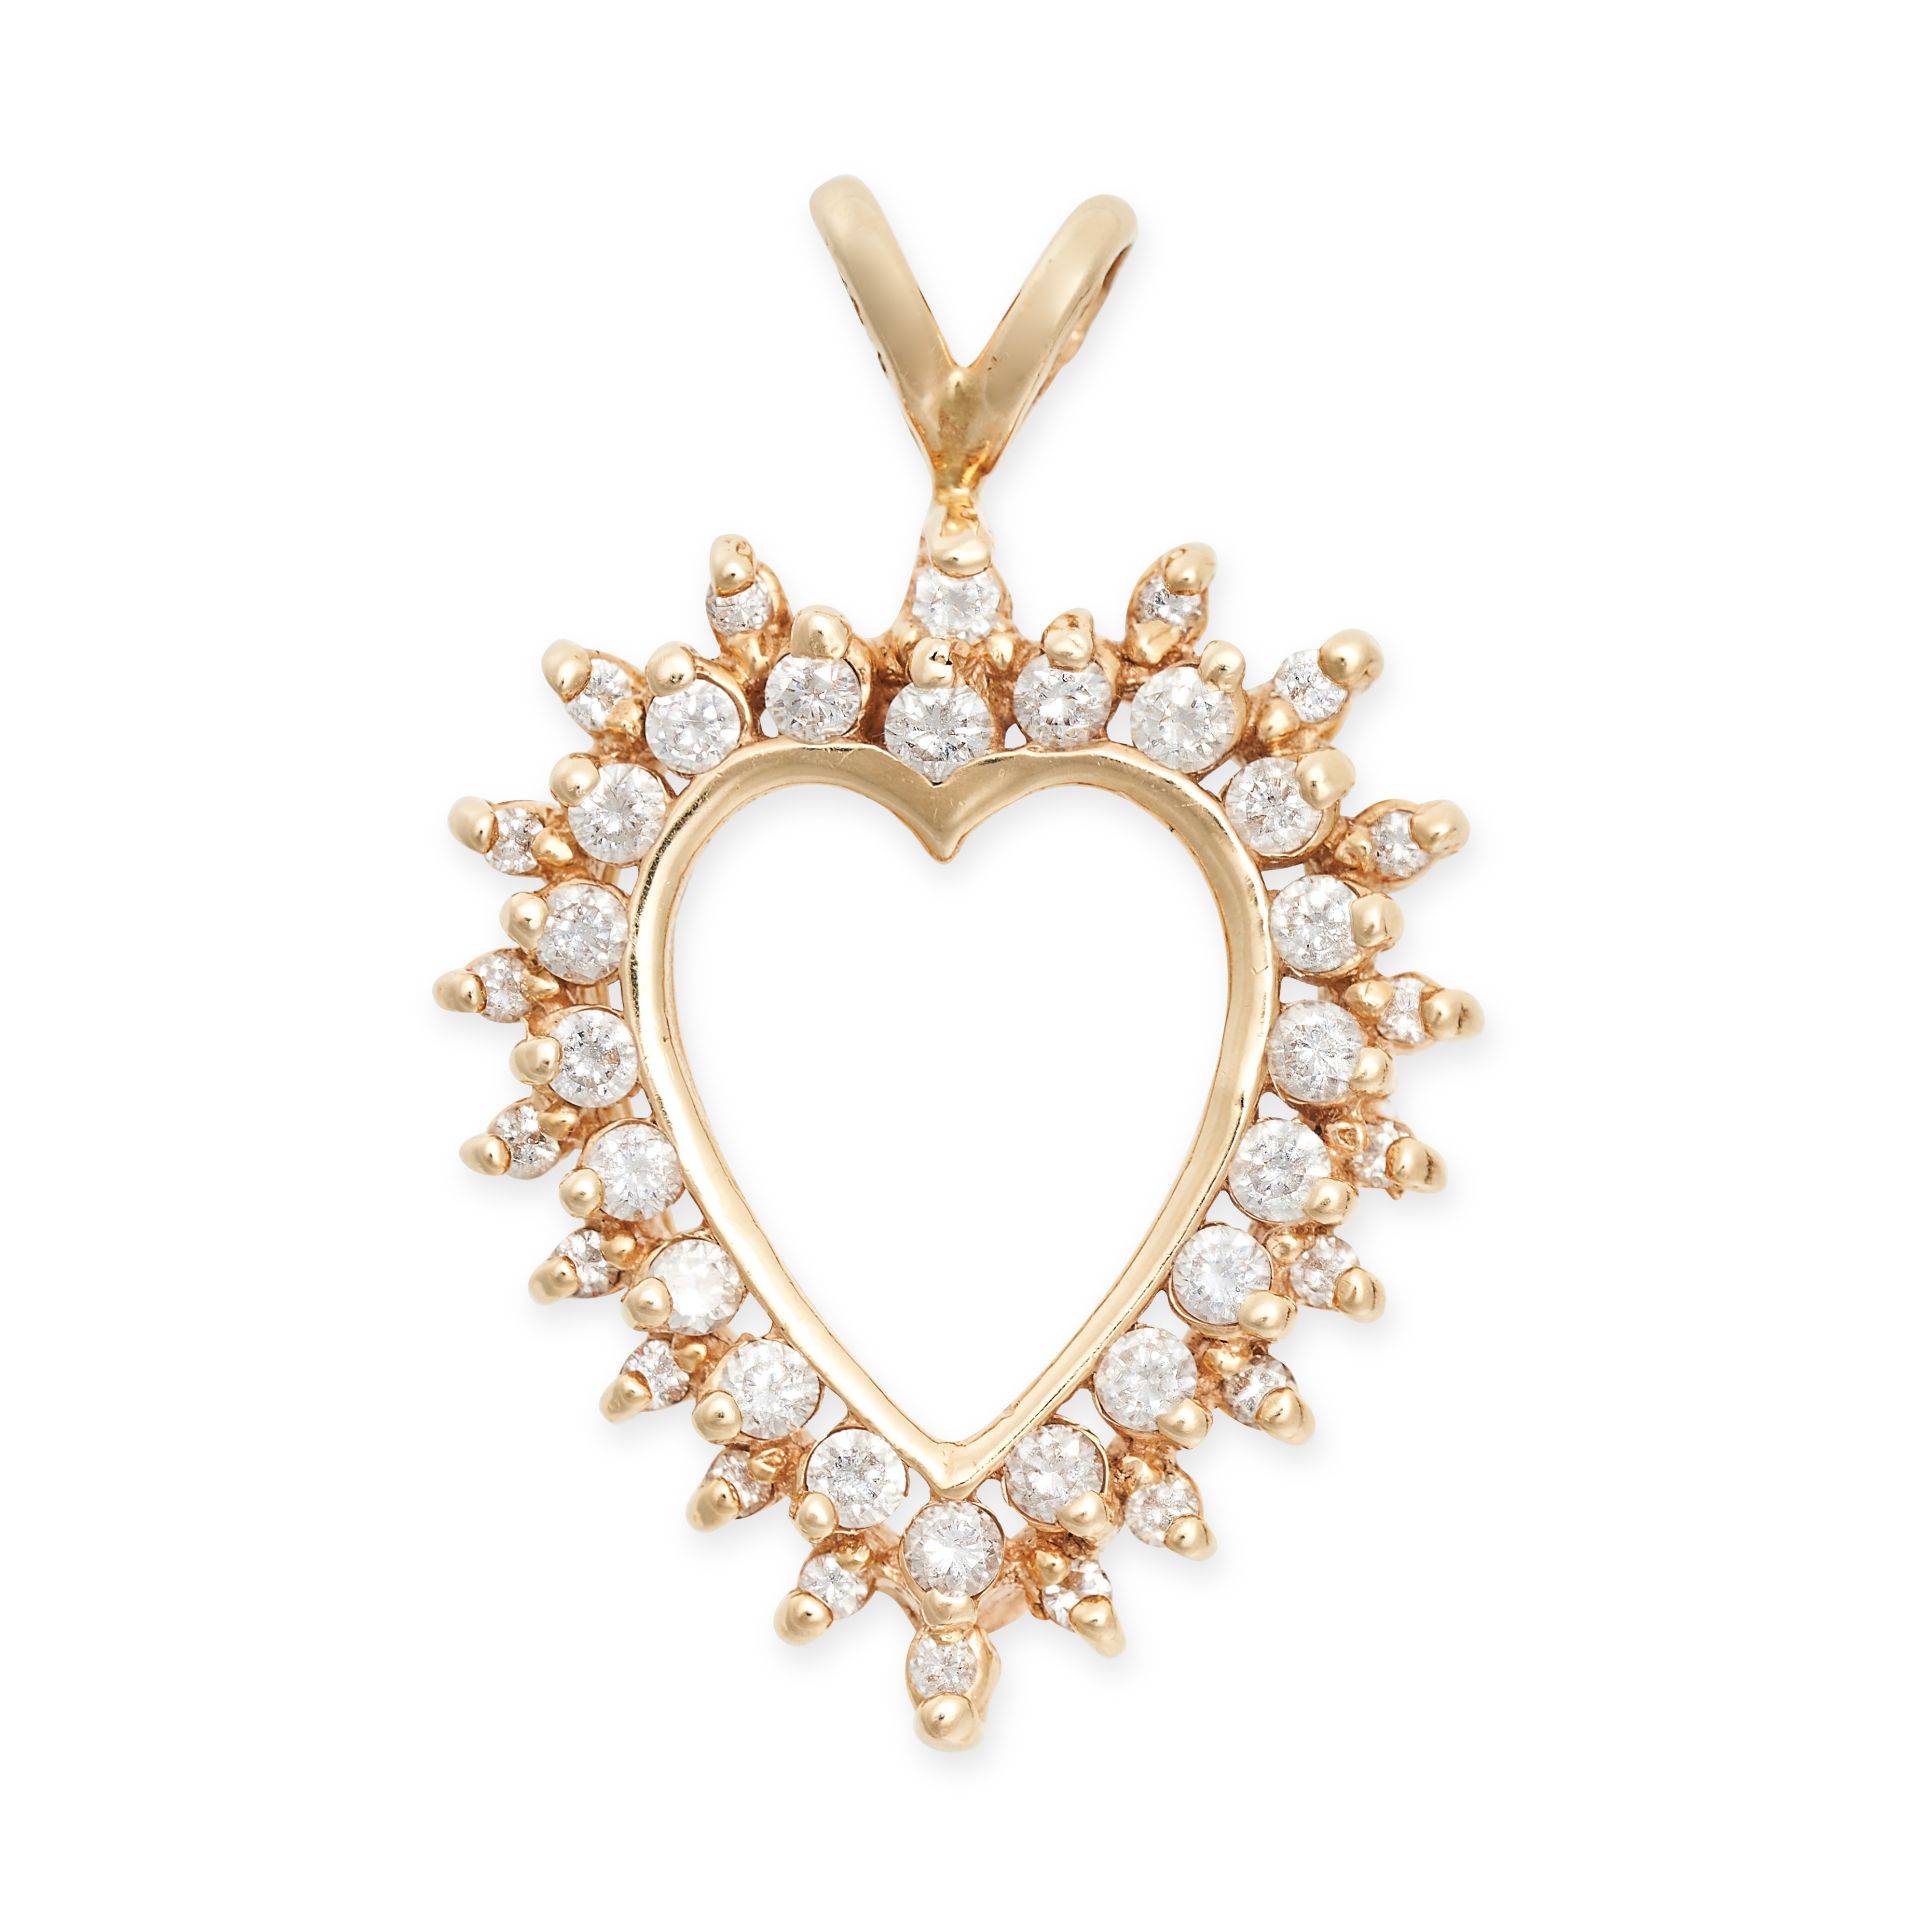 A DIAMOND HEART PENDANT in 14ct yellow gold, designed as an openwork heart, set with round brilliant